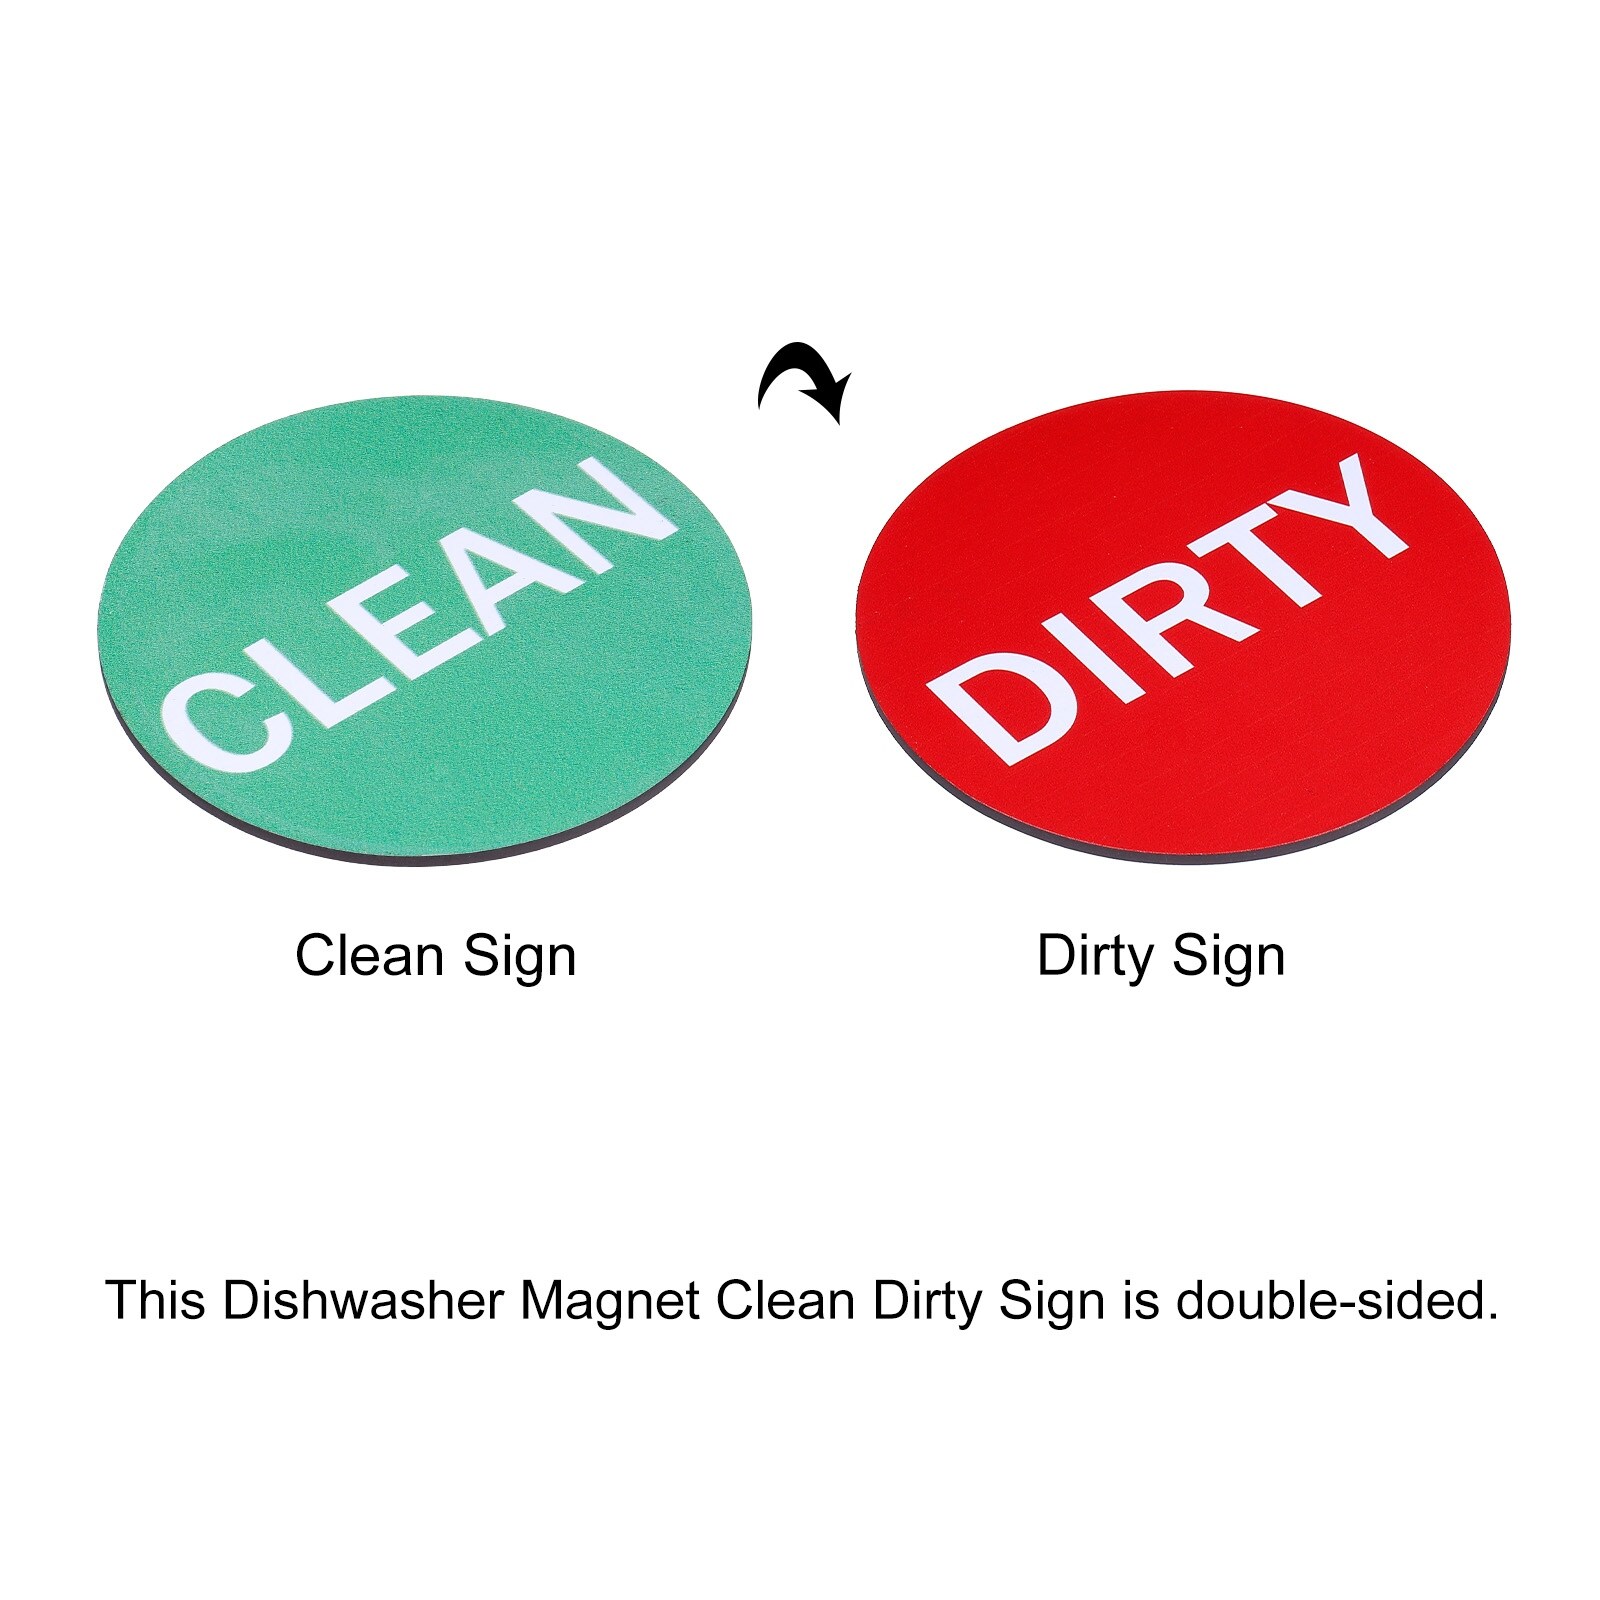 Clean Dirty Dishwasher Magnet (Red / Green)